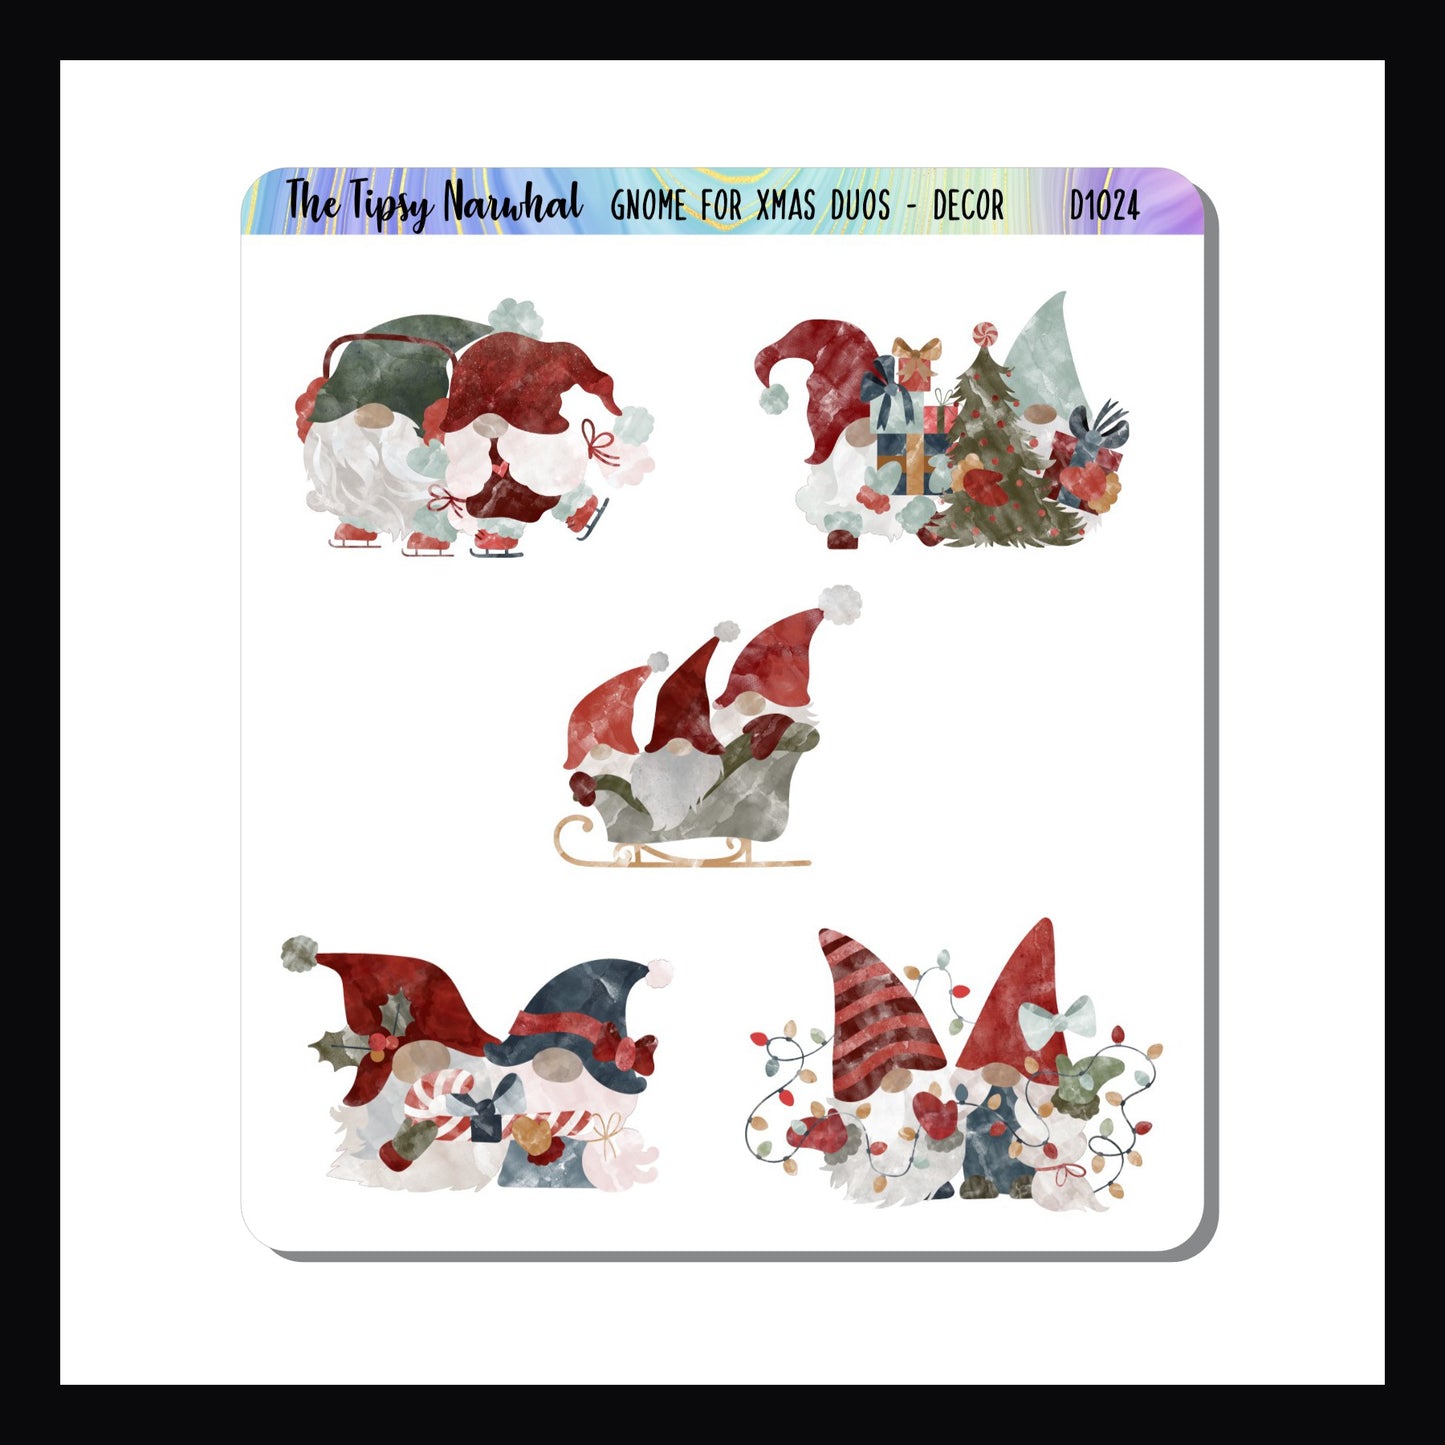 Gnome for Christmas Duos Decor sheet features 5 pairs of gnomes getting ready for the Christmas season.